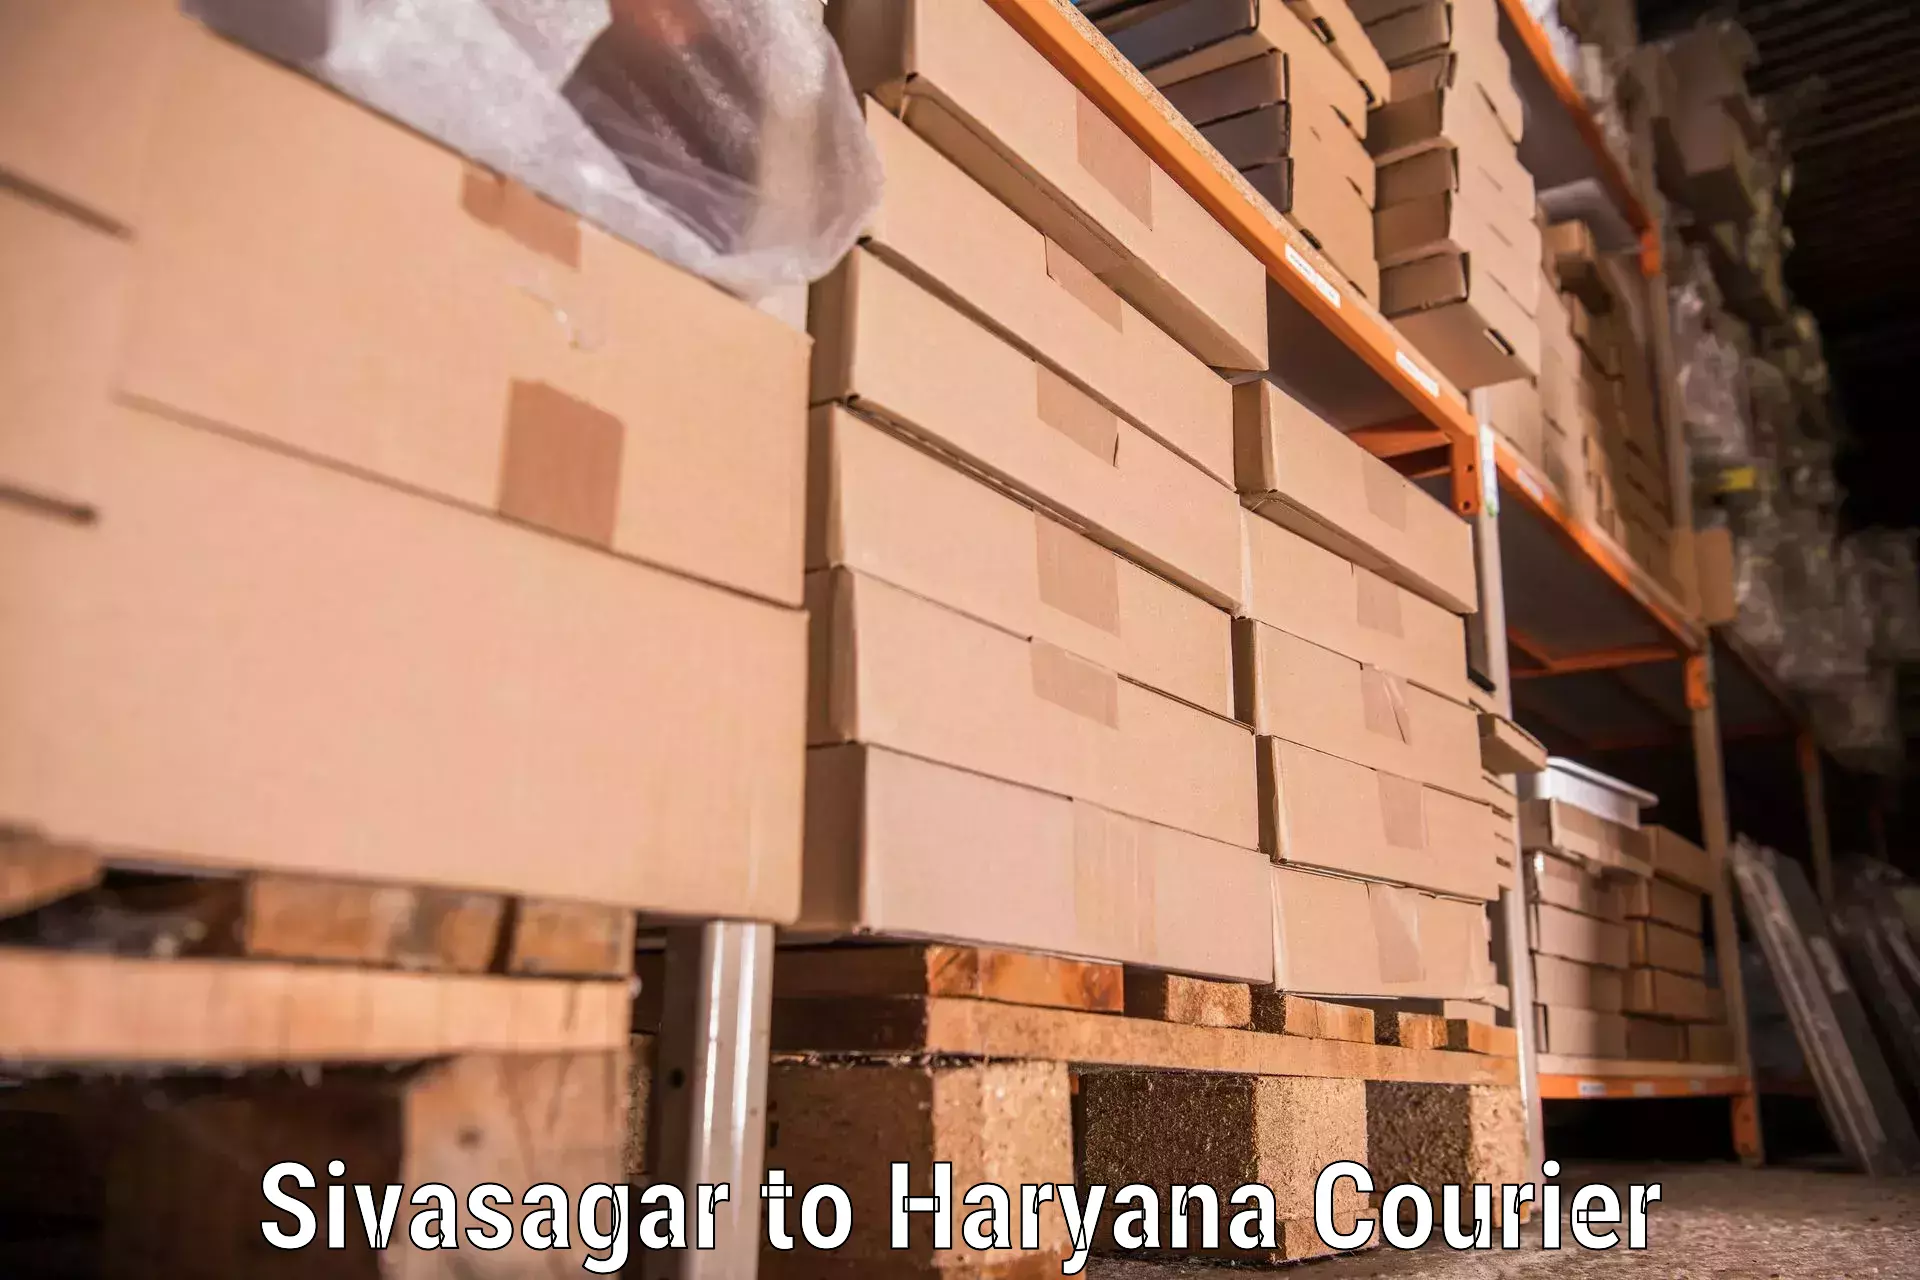 Quality relocation services Sivasagar to Gurgaon